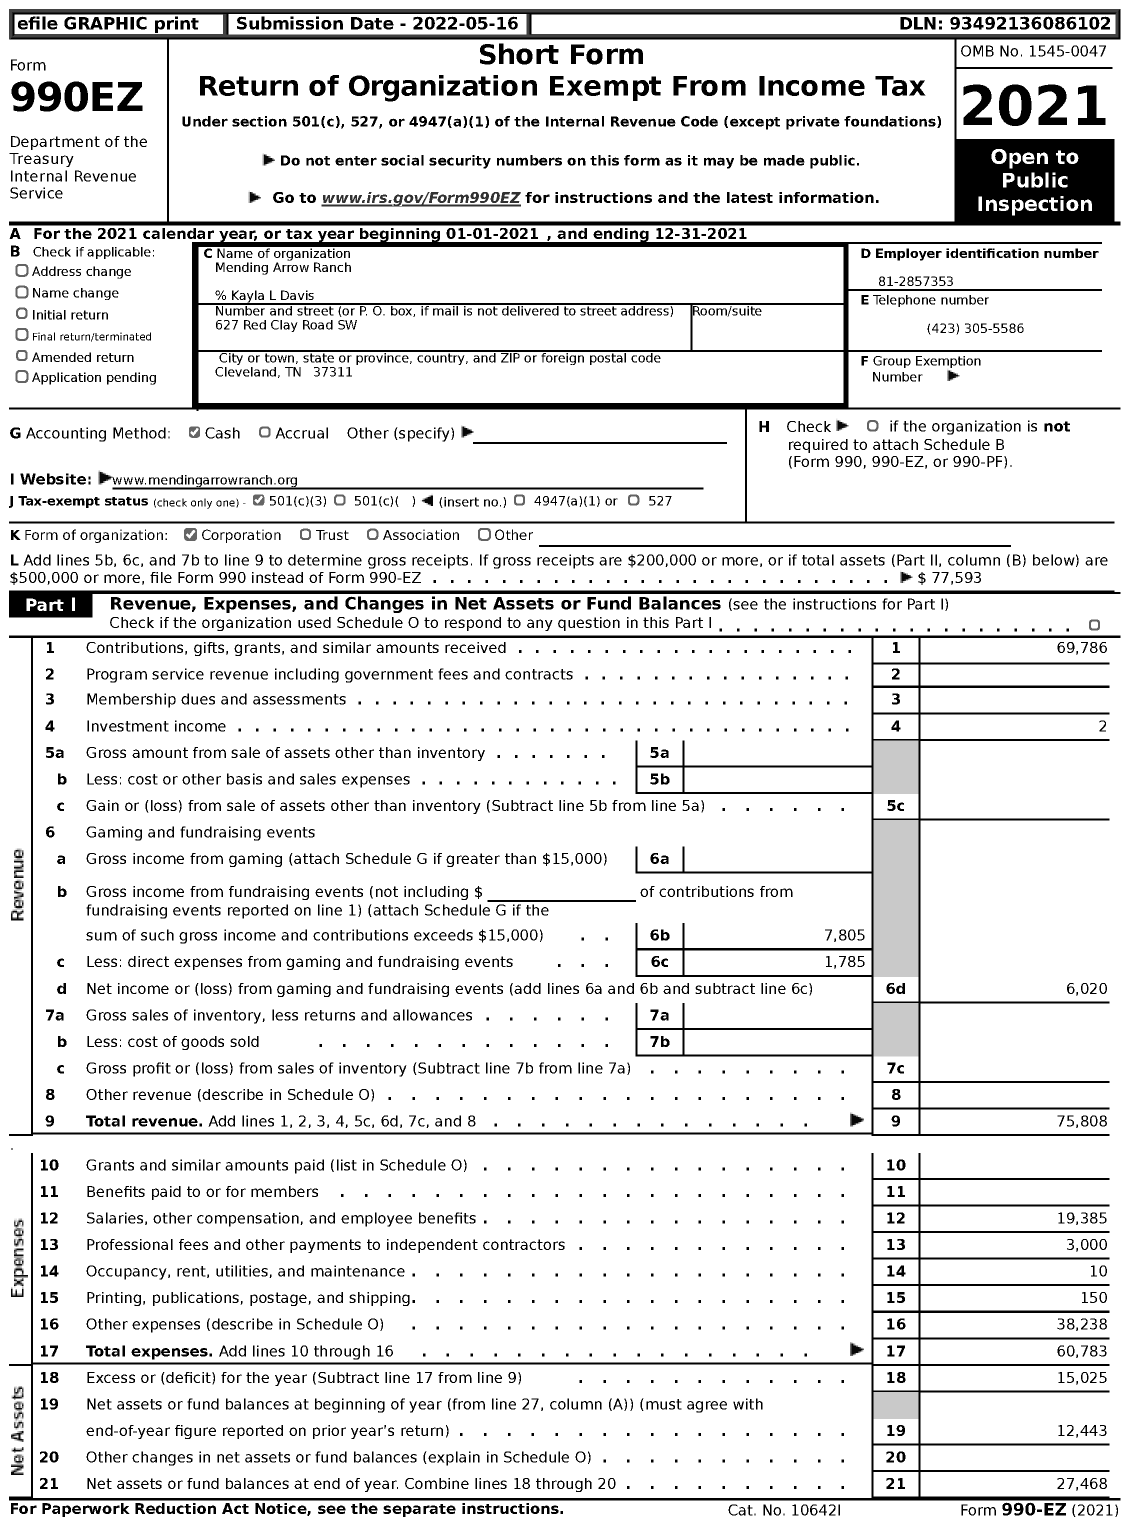 Image of first page of 2021 Form 990EZ for Mending Arrow Ranch